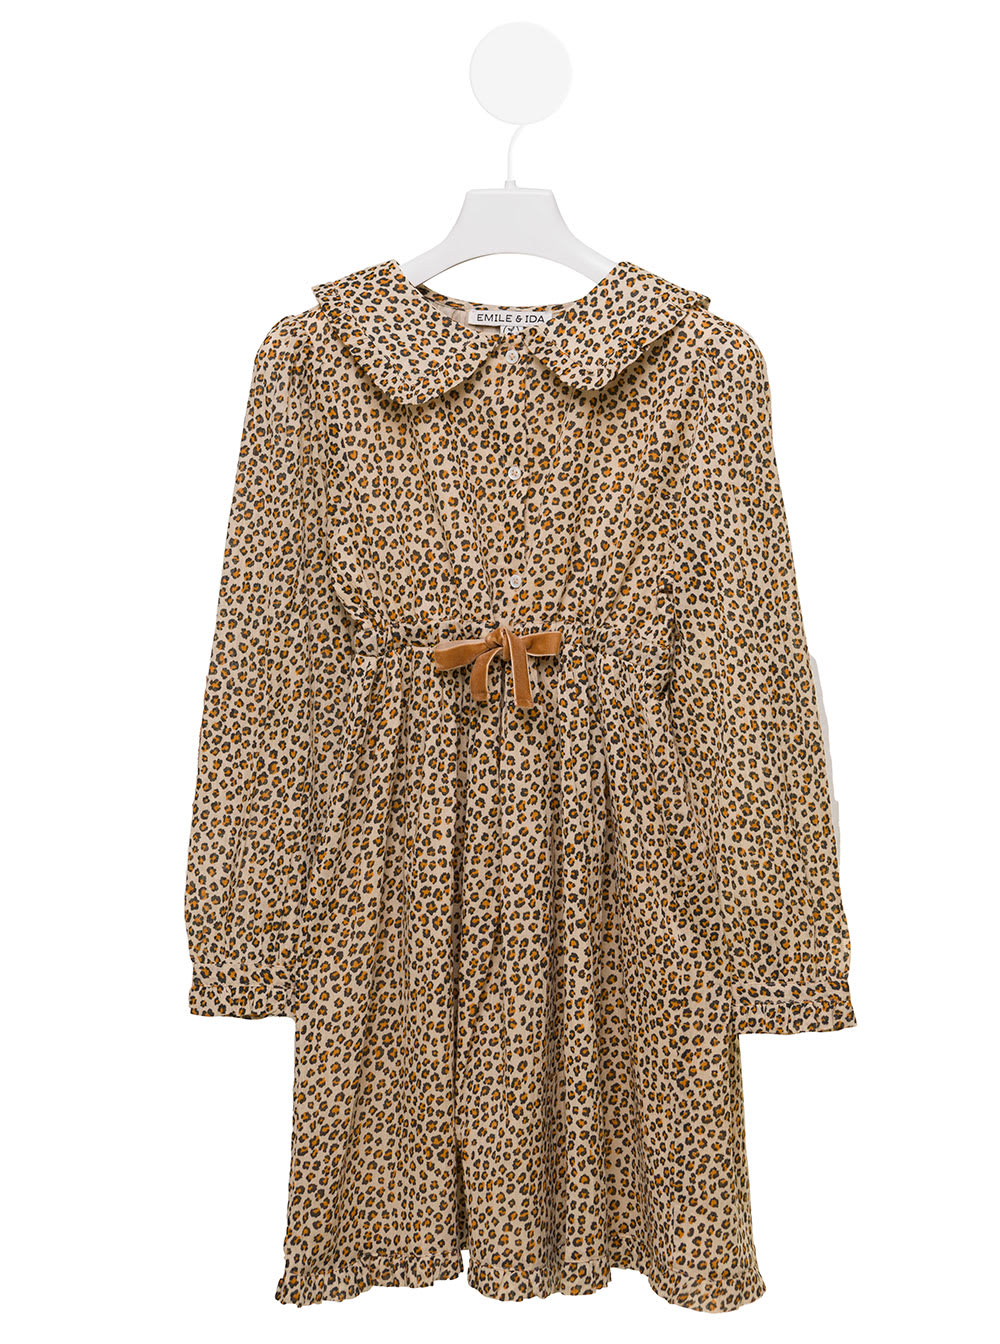 Emile Et Ida Kids Baby Girls Leopard Dress With Bow In Brown